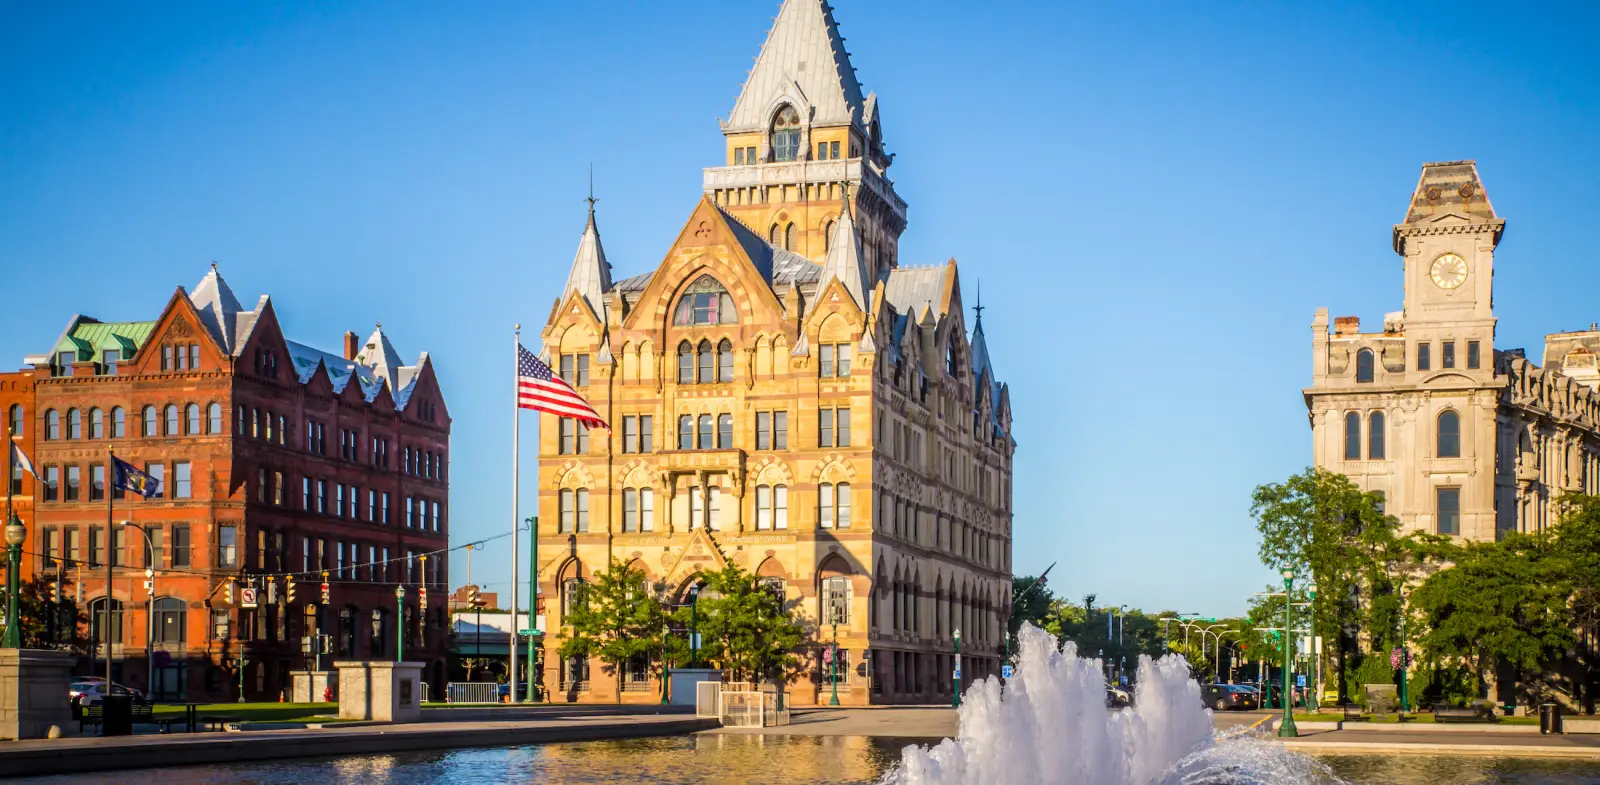 Downtown Syracuse New York with view of historic buildings and fountain at Clinton Square